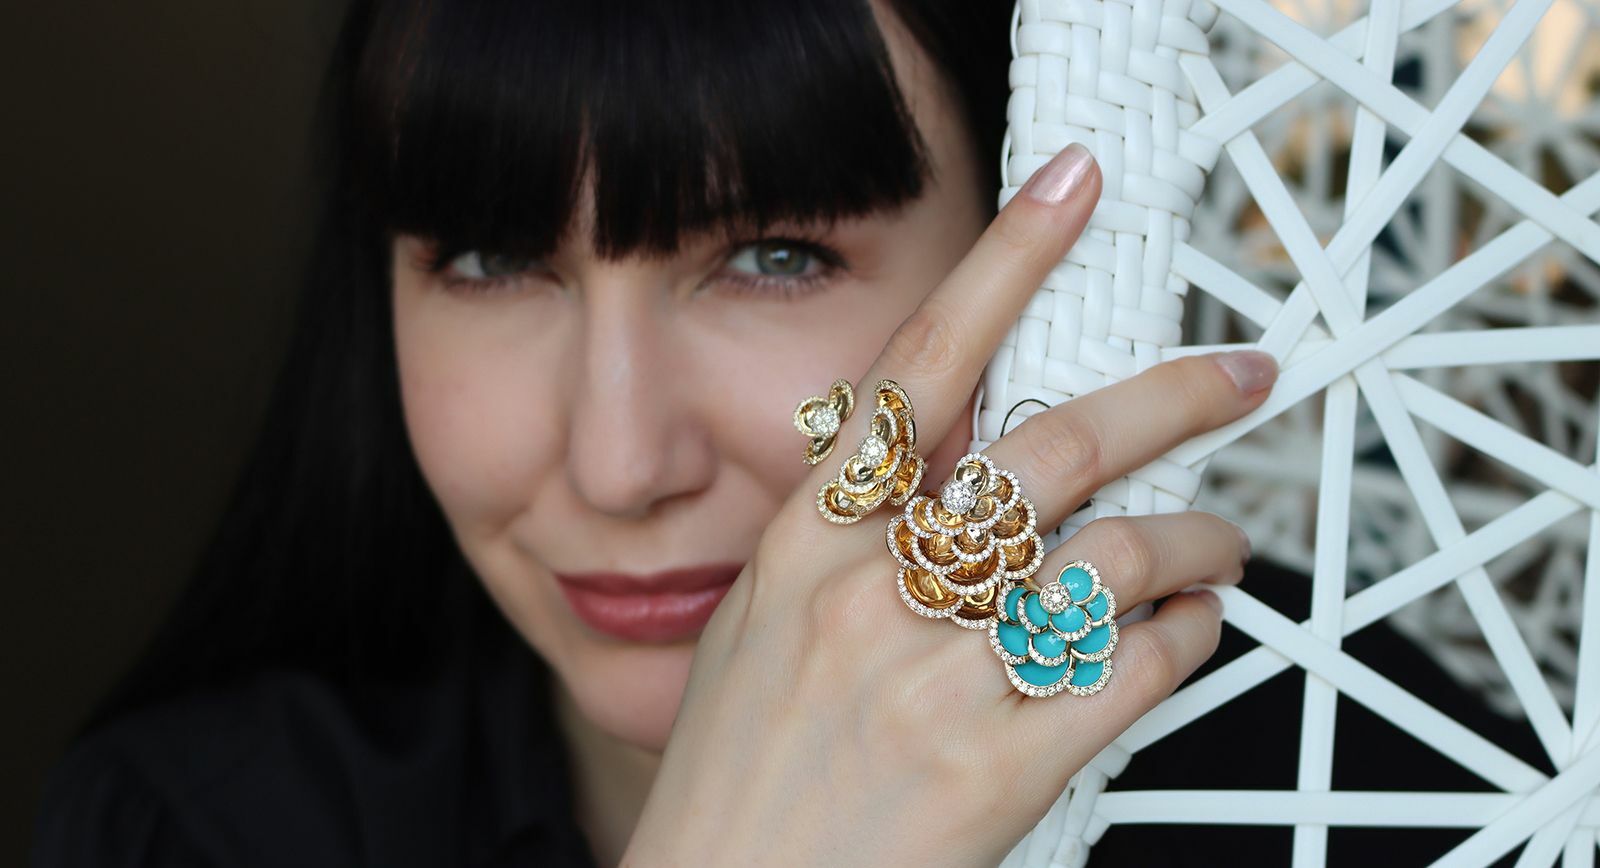 Katerina Perez wears rings from the Petals Collection by FerriFirenze 